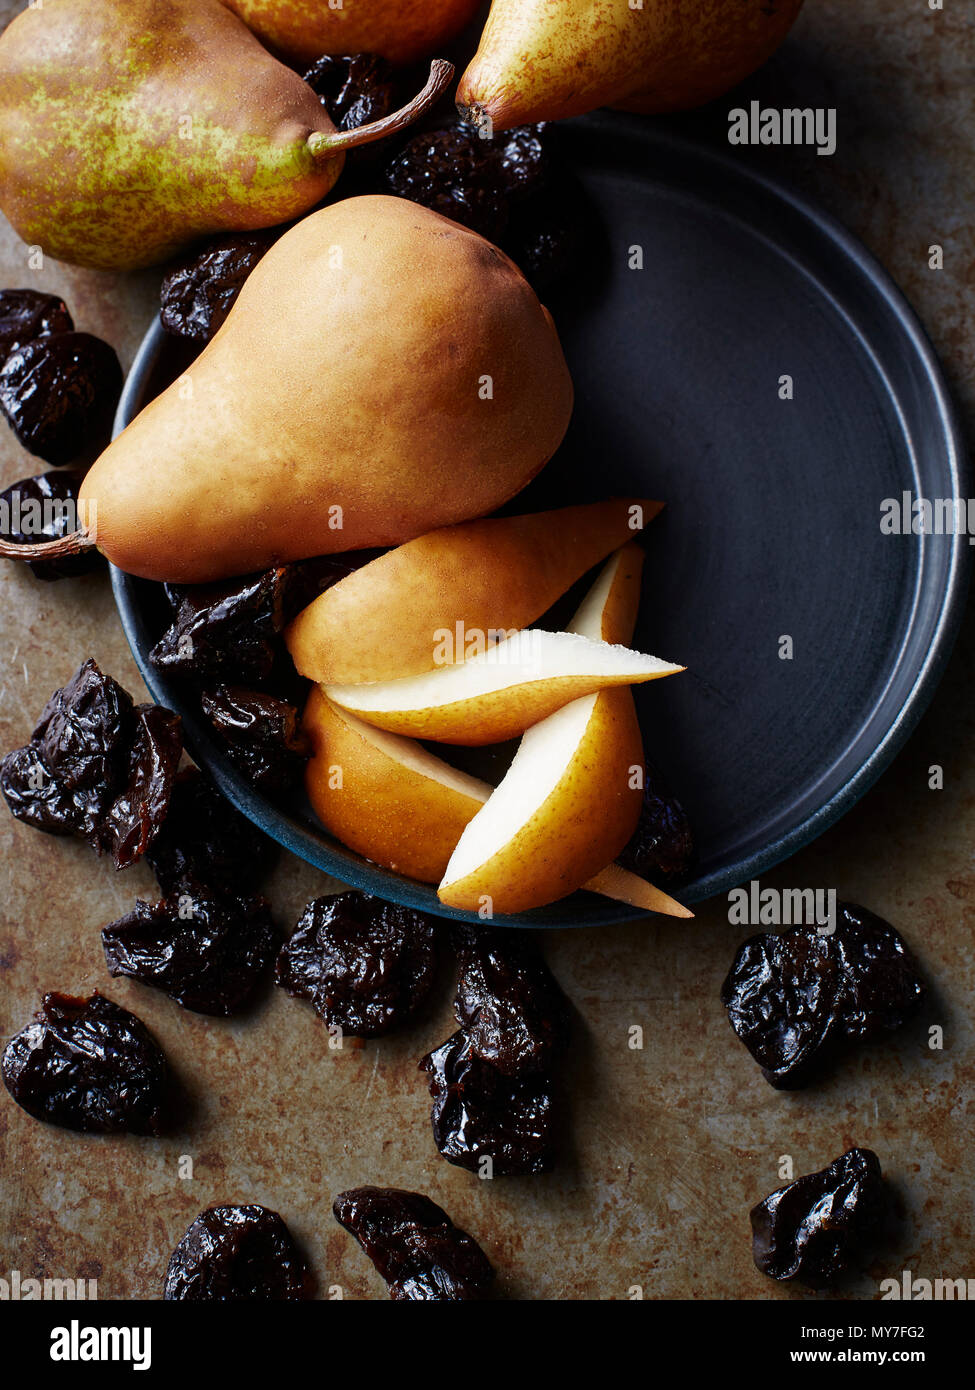 Still life with fresh pears and prunes, overhead view Stock Photo